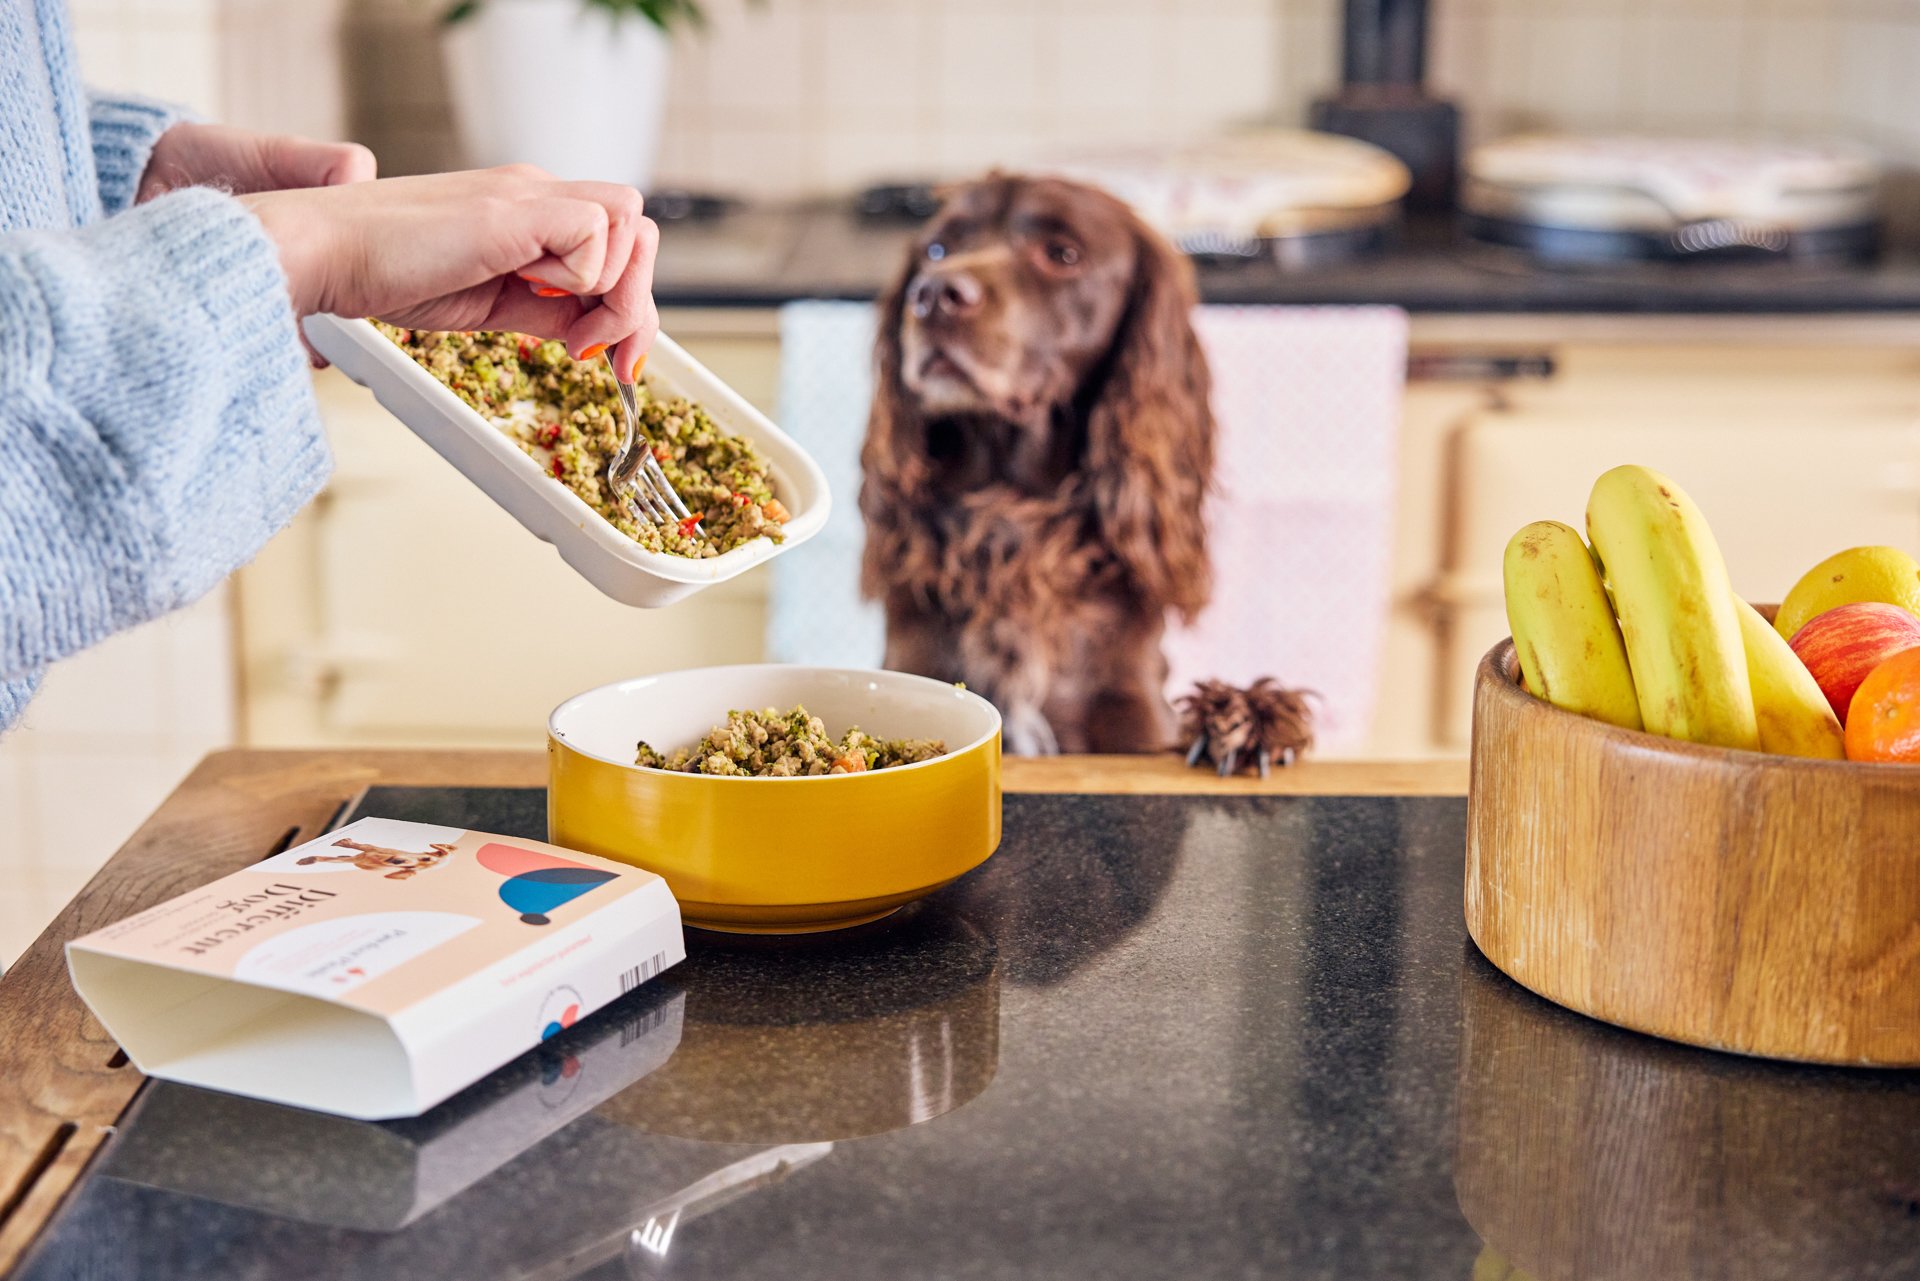 Why Should You Feed Your Puppy Fresh Dog Food?